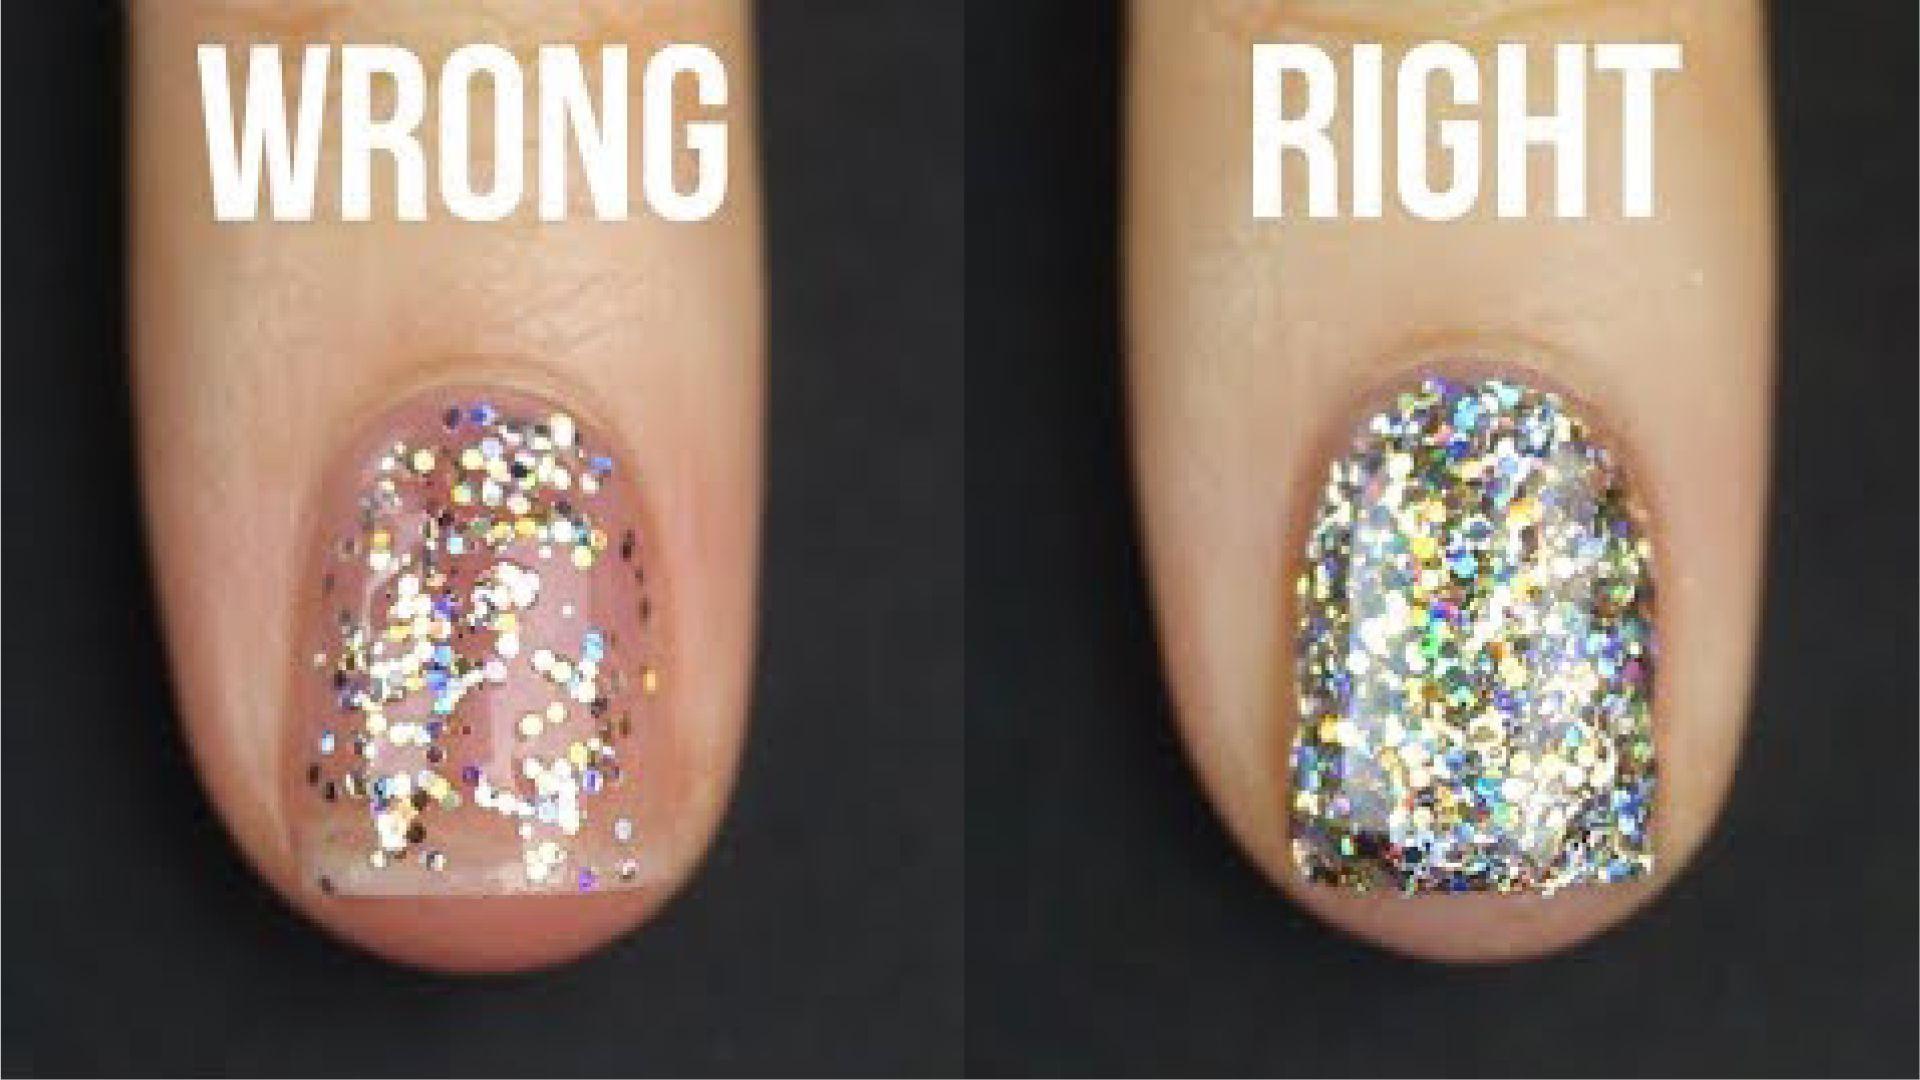 7. "Glitter nail polish colors for under nail sparkle" - wide 10